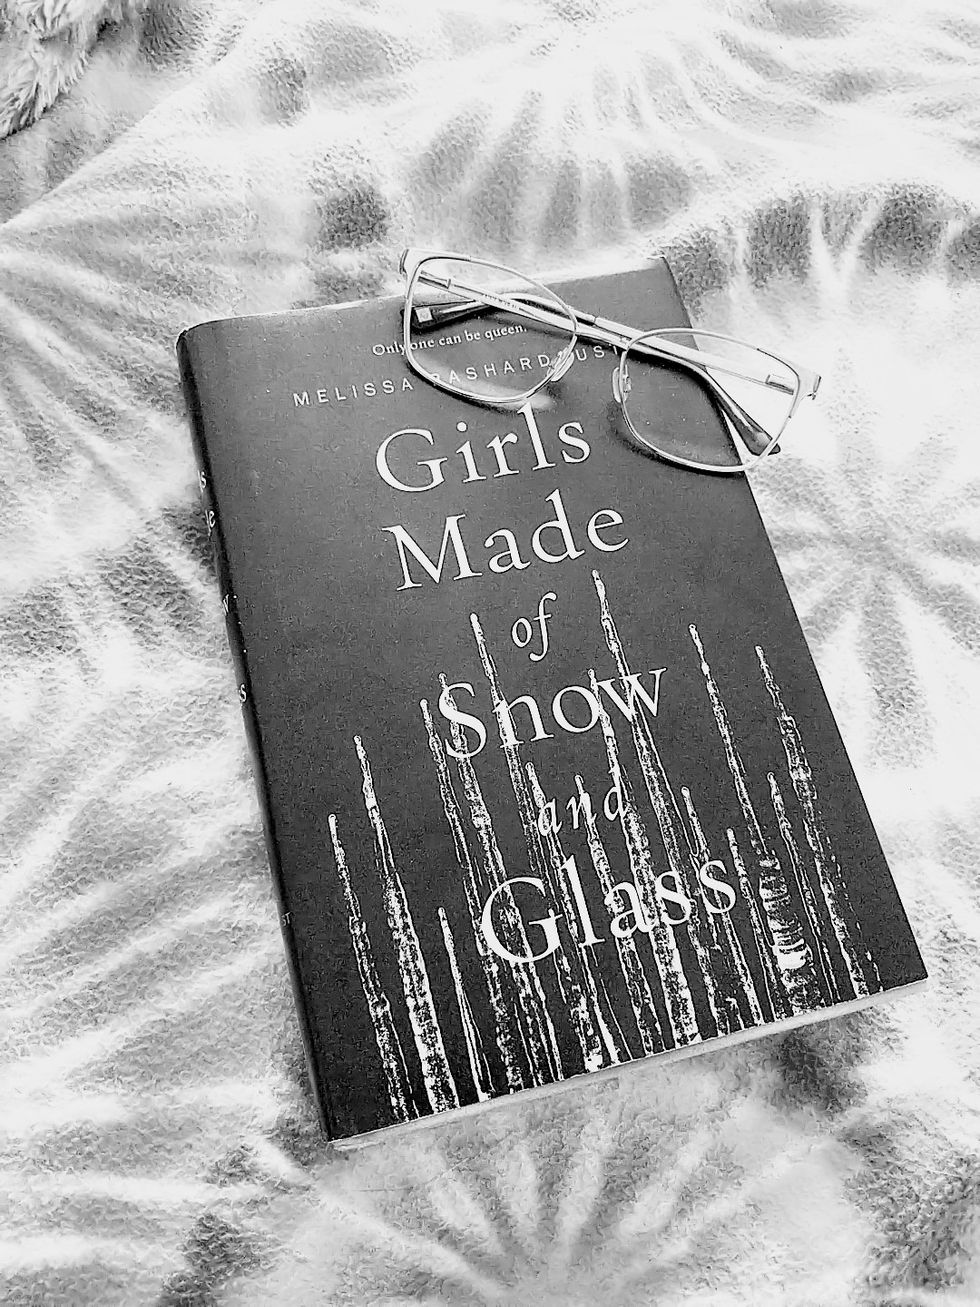 Why You Should Read 'Girls Made of Snow and Glass' By Melissa Bashardoust